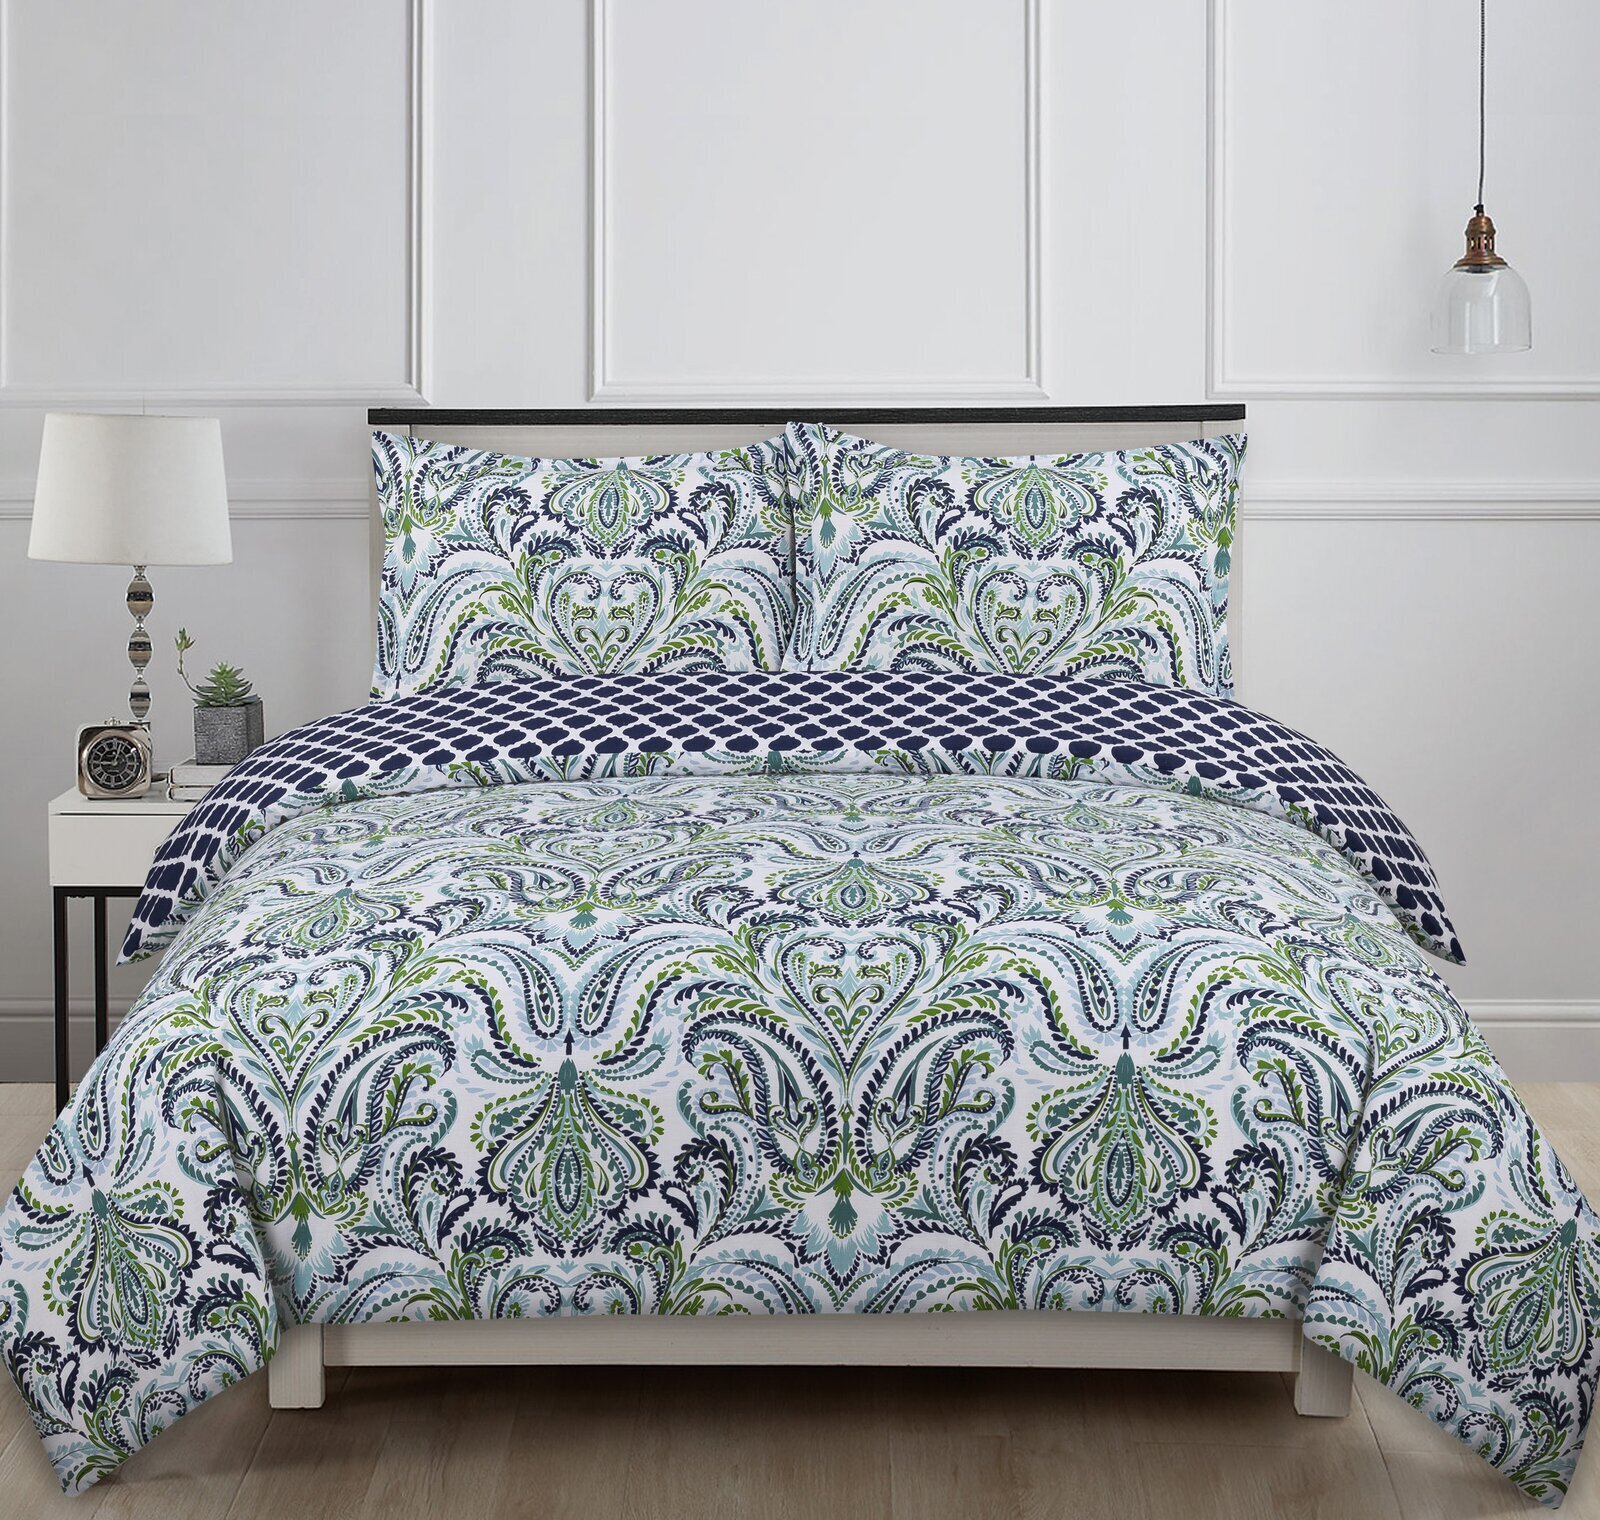 Classy Navy Blue and Green Bedding